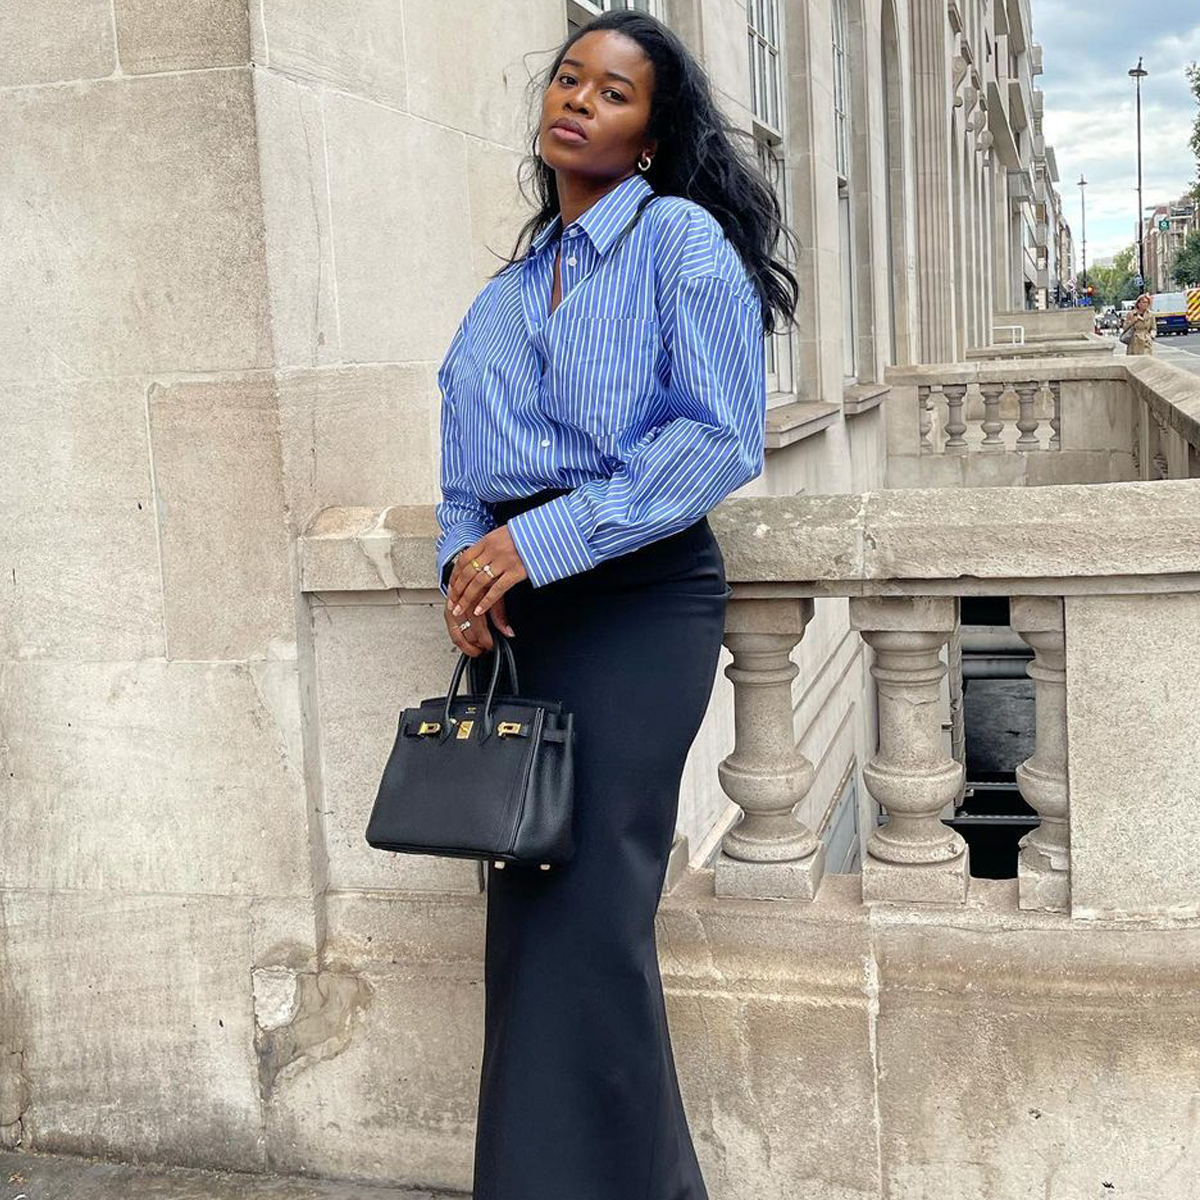 These 7 Maxi-Skirt Outfits Are Next-Level Chic